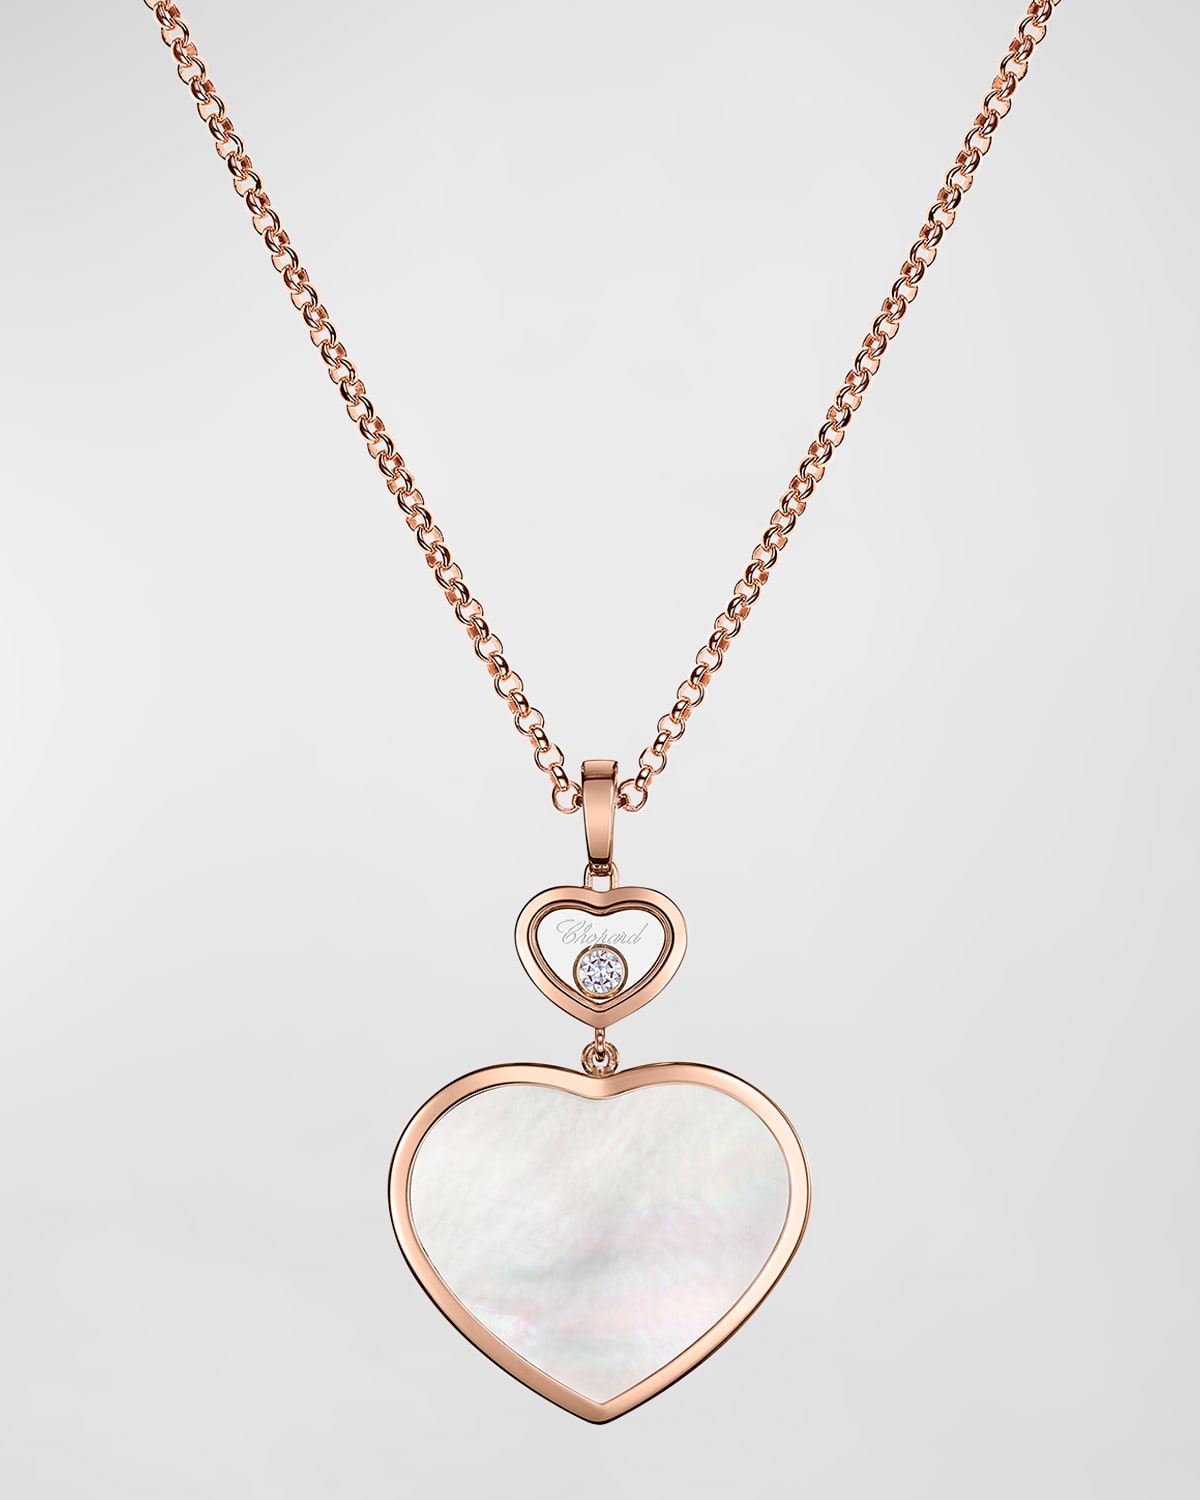 Happy Hearts 18K Rose Gold & Mother-of-Pearl Necklace with Diamond